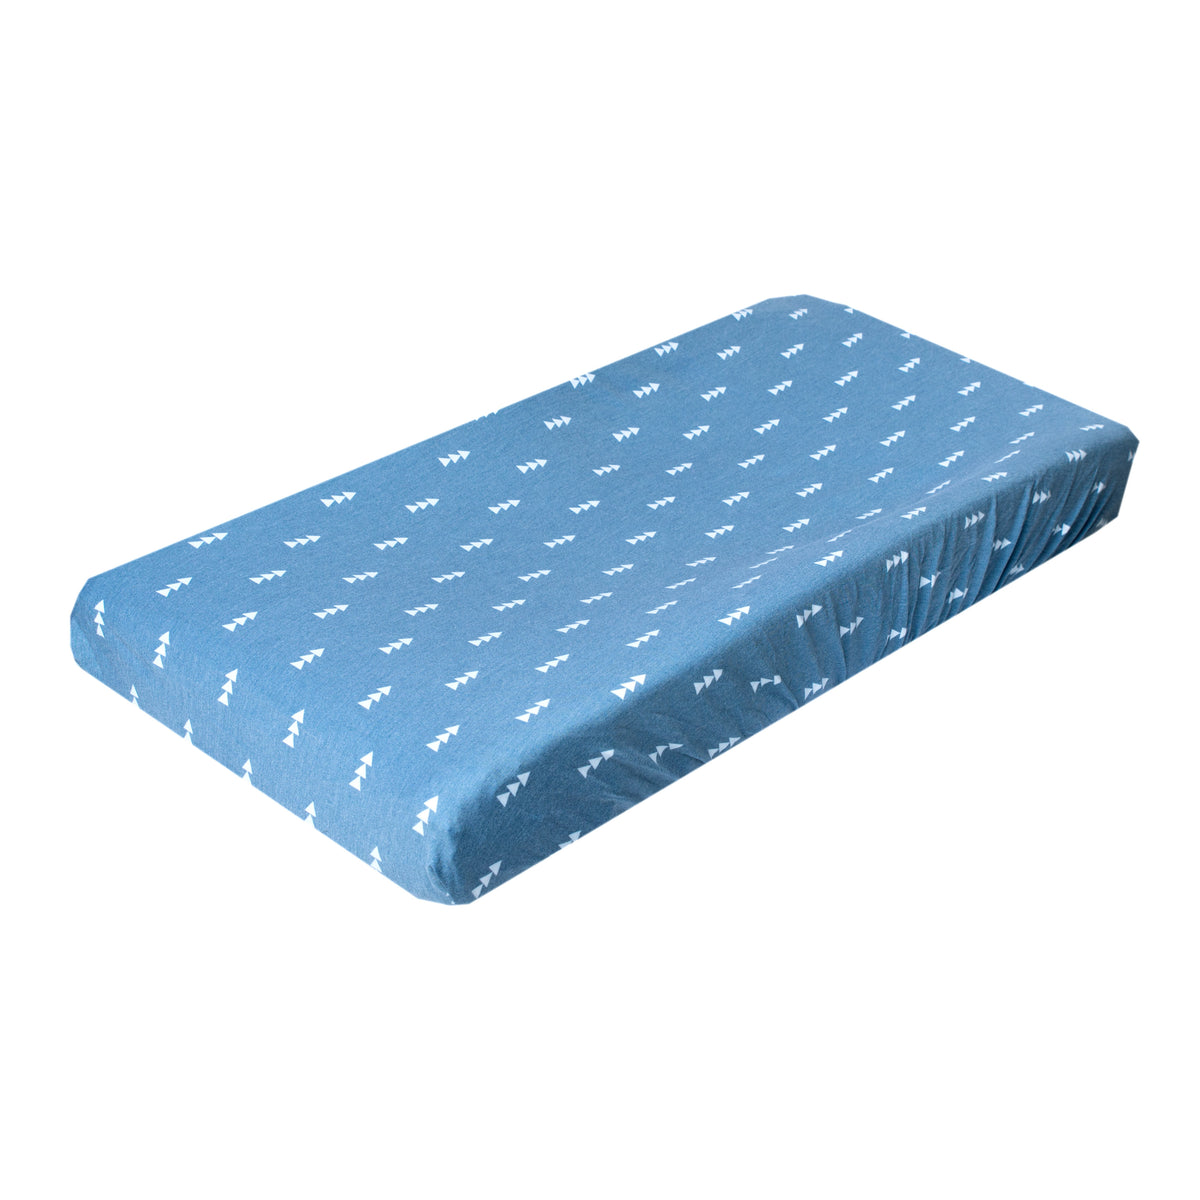 Premium Knit Diaper Changing Pad Cover - North